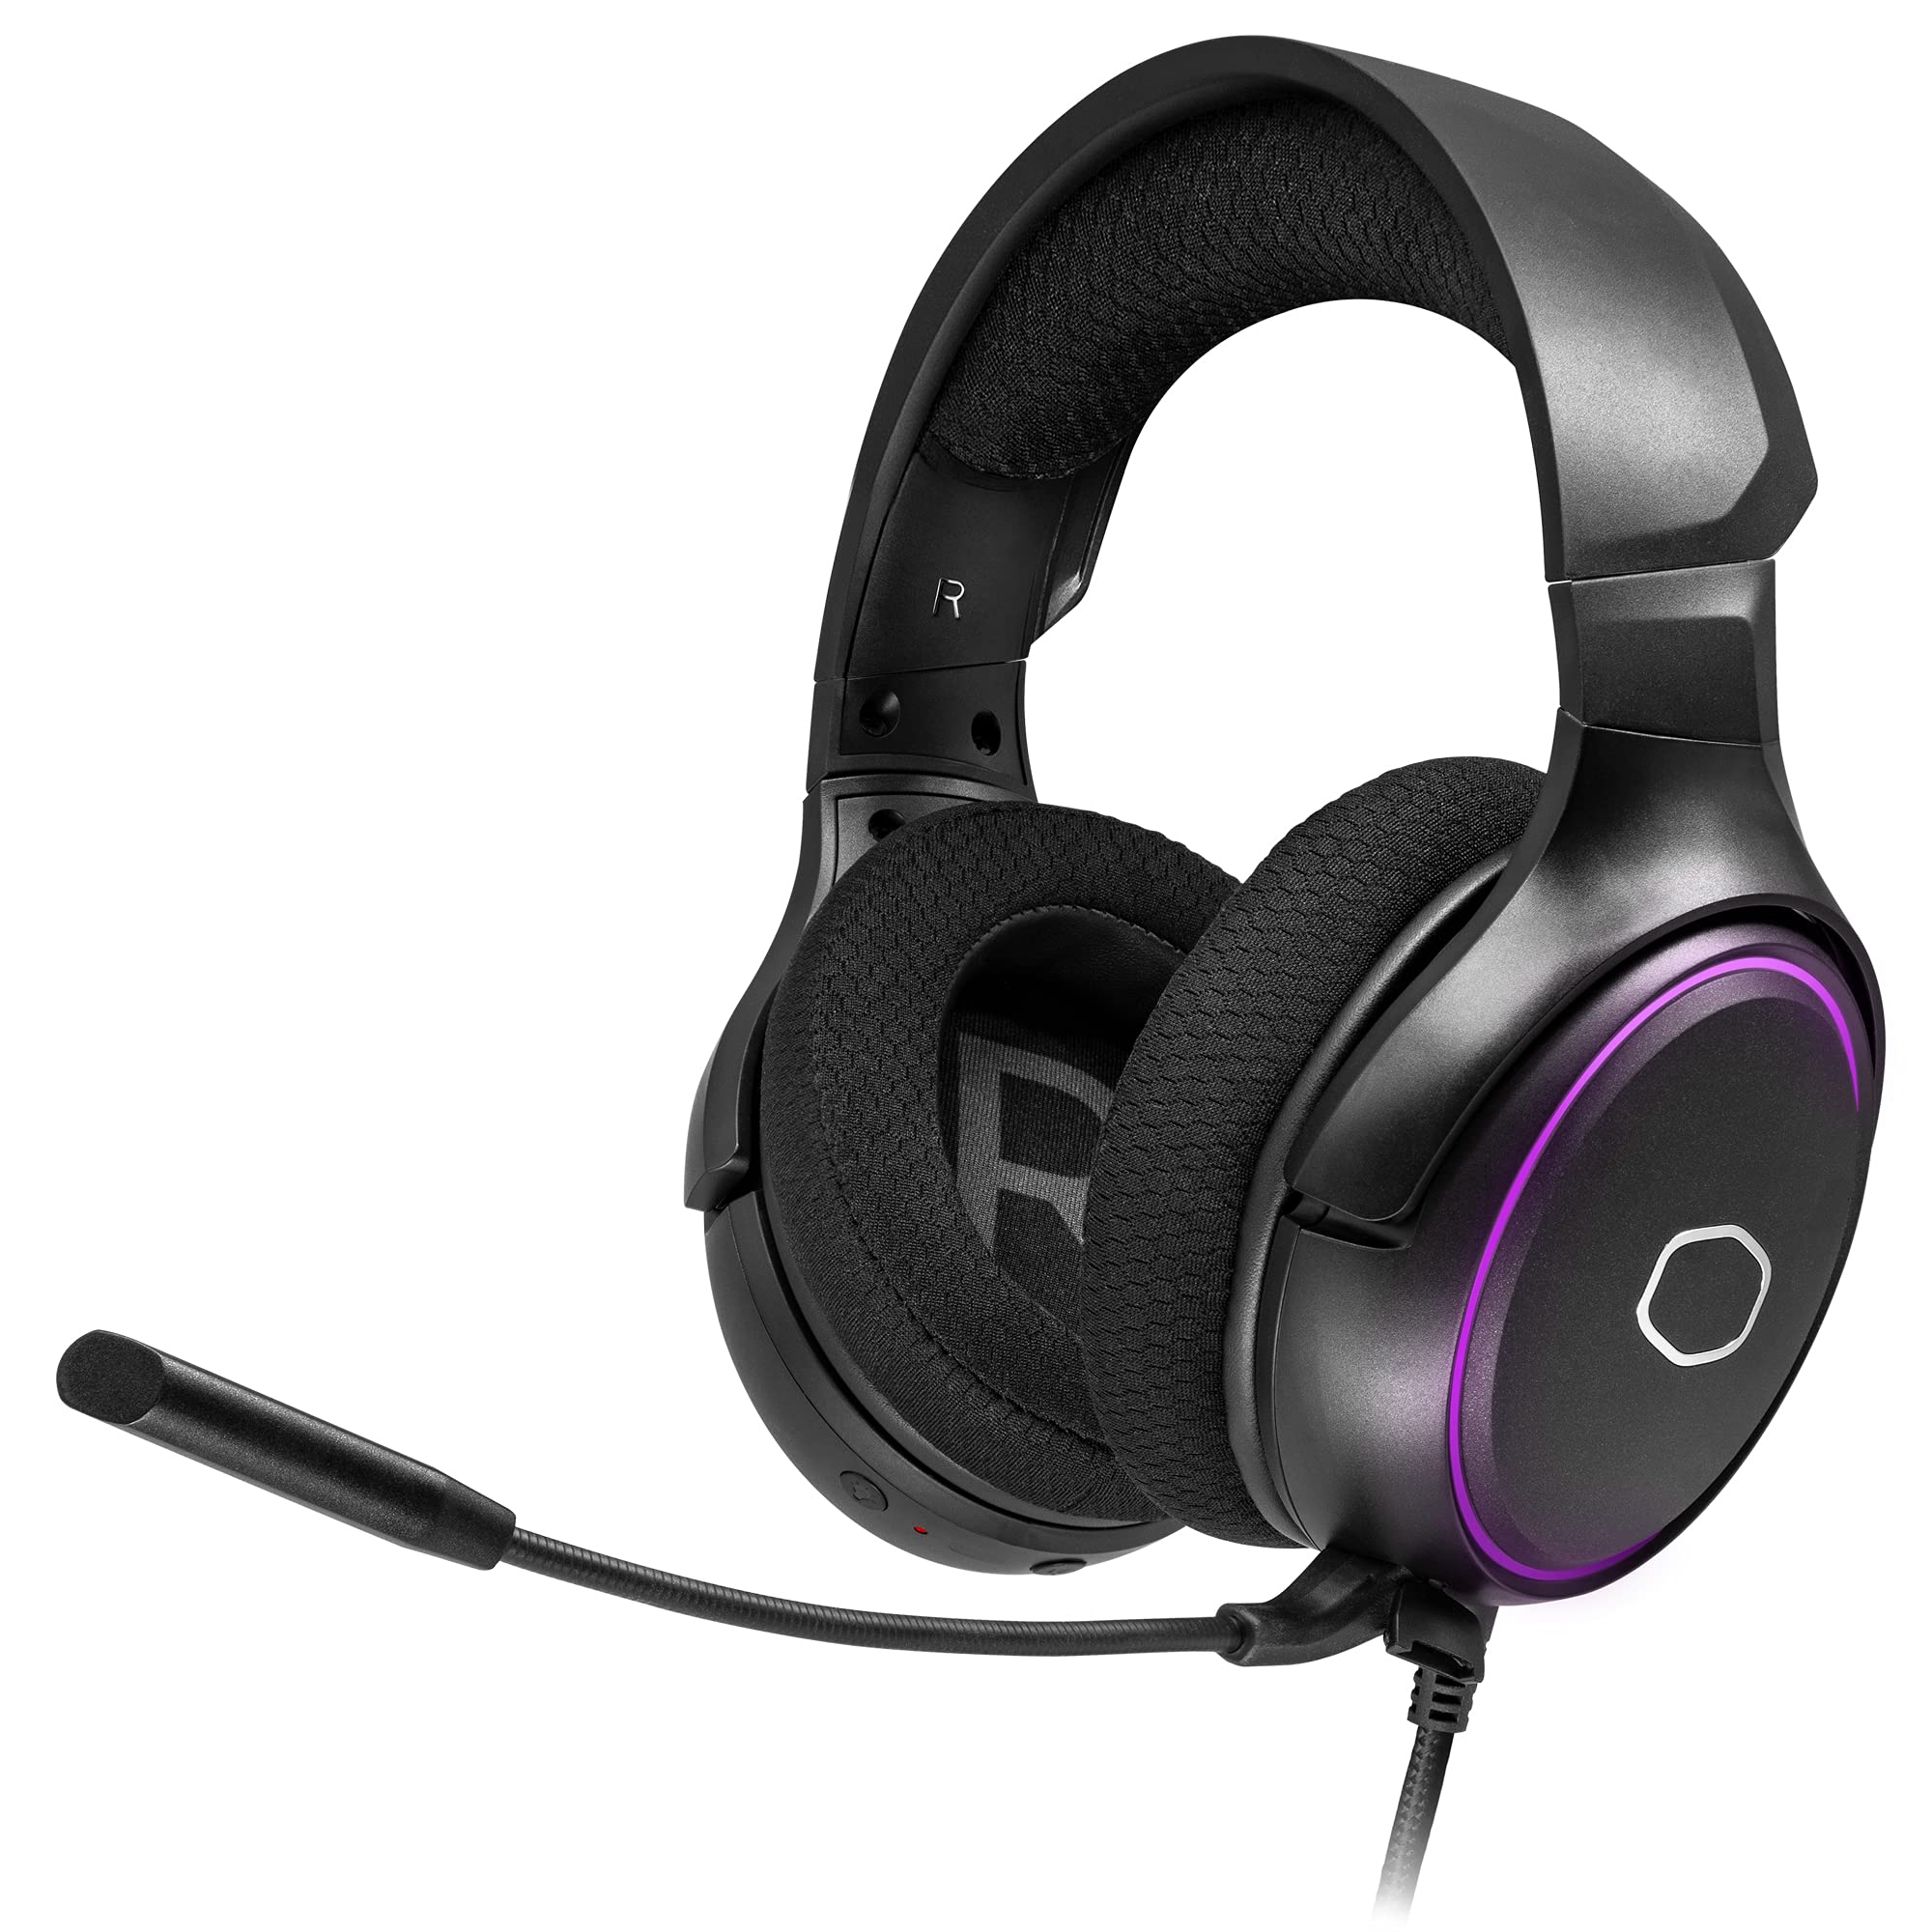 Outlet Shop  Cooler Master MH650 RGB Gaming Headset with Virtual 7.1 Surround Sound - Cross-Platform Compatible with 50mm Neodymium Audio Drivers, Ultra-Clear Boom Mic and Portable Frame - USB Type A, Black qOzhZZA8C Prix ​​bas